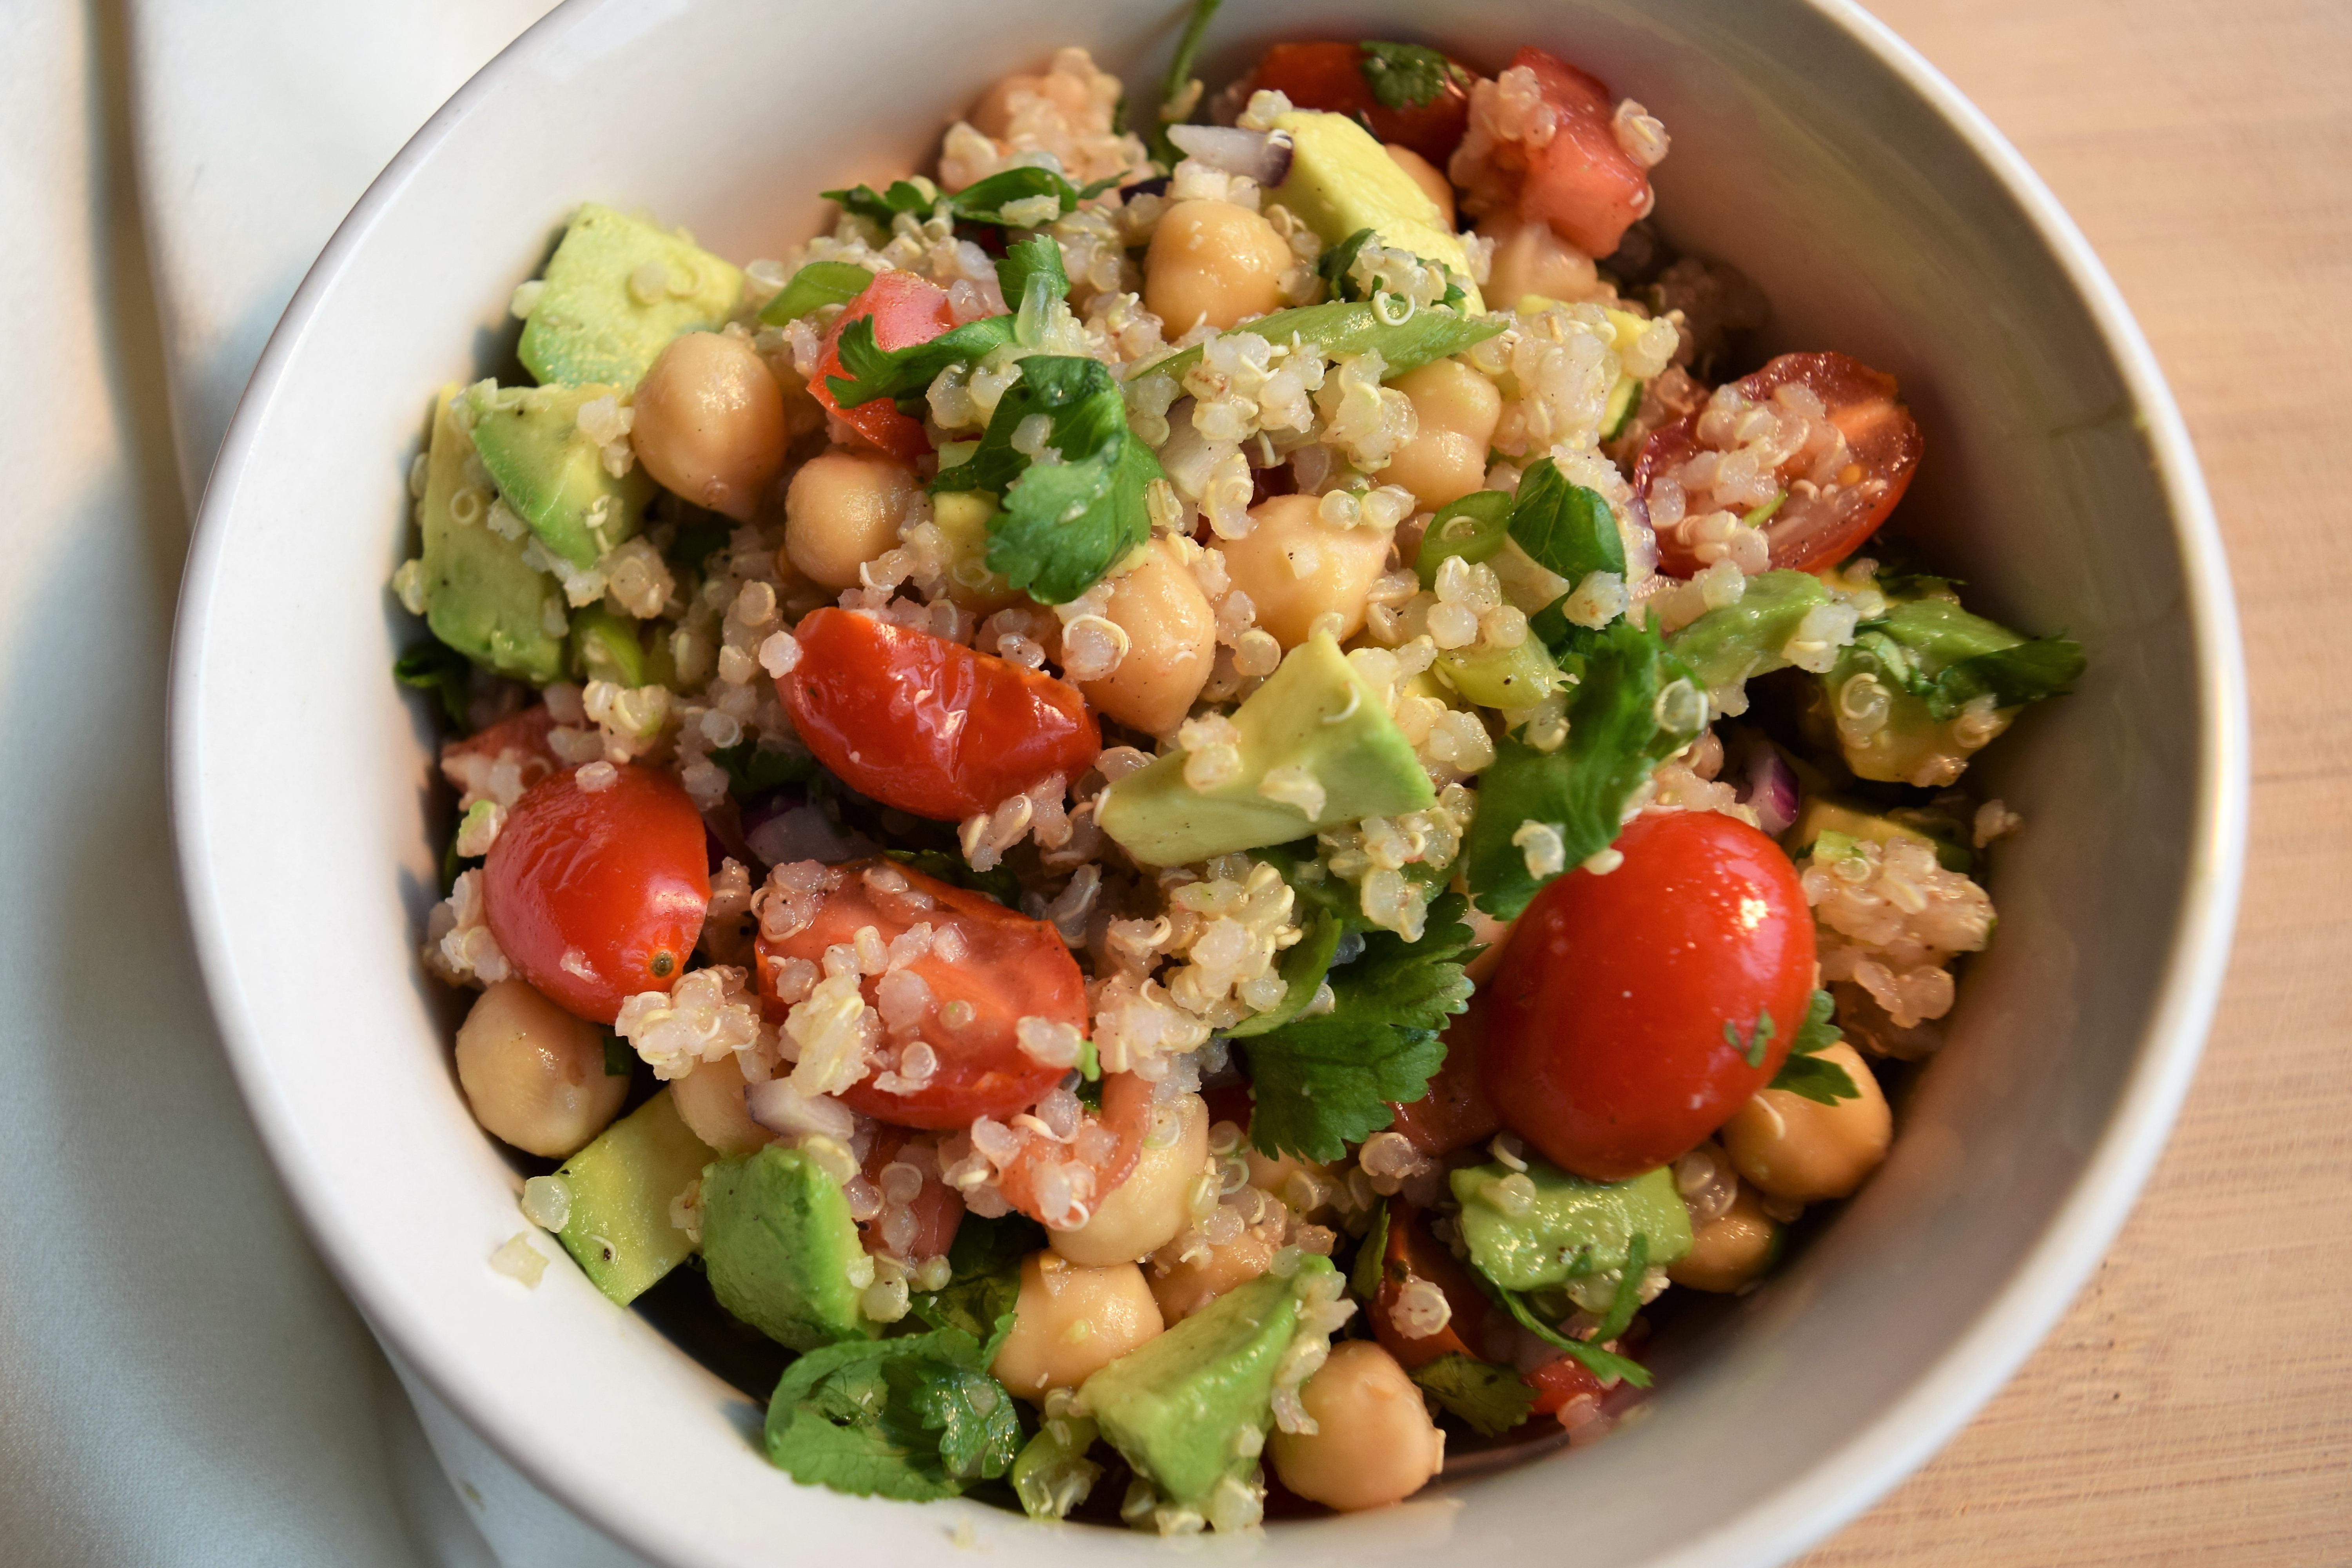 You are currently viewing Vegan Quinoa Salad with Chickpeas